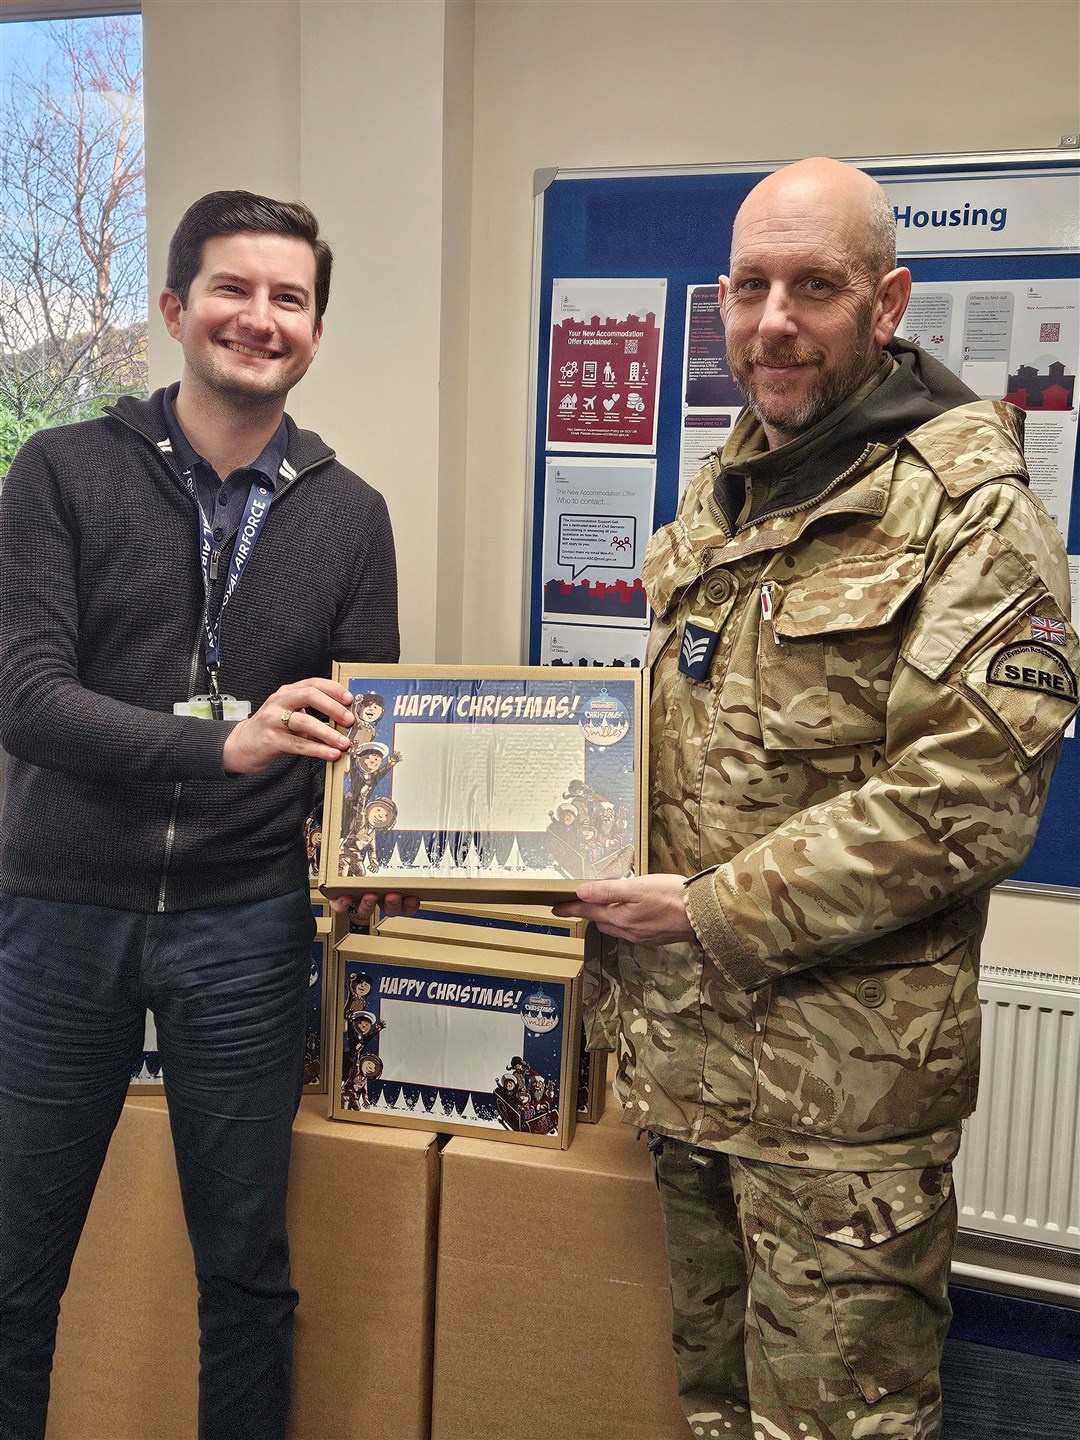 Chris, RAF Lossiemouth support clerk, hands a box to a local dad for his children.